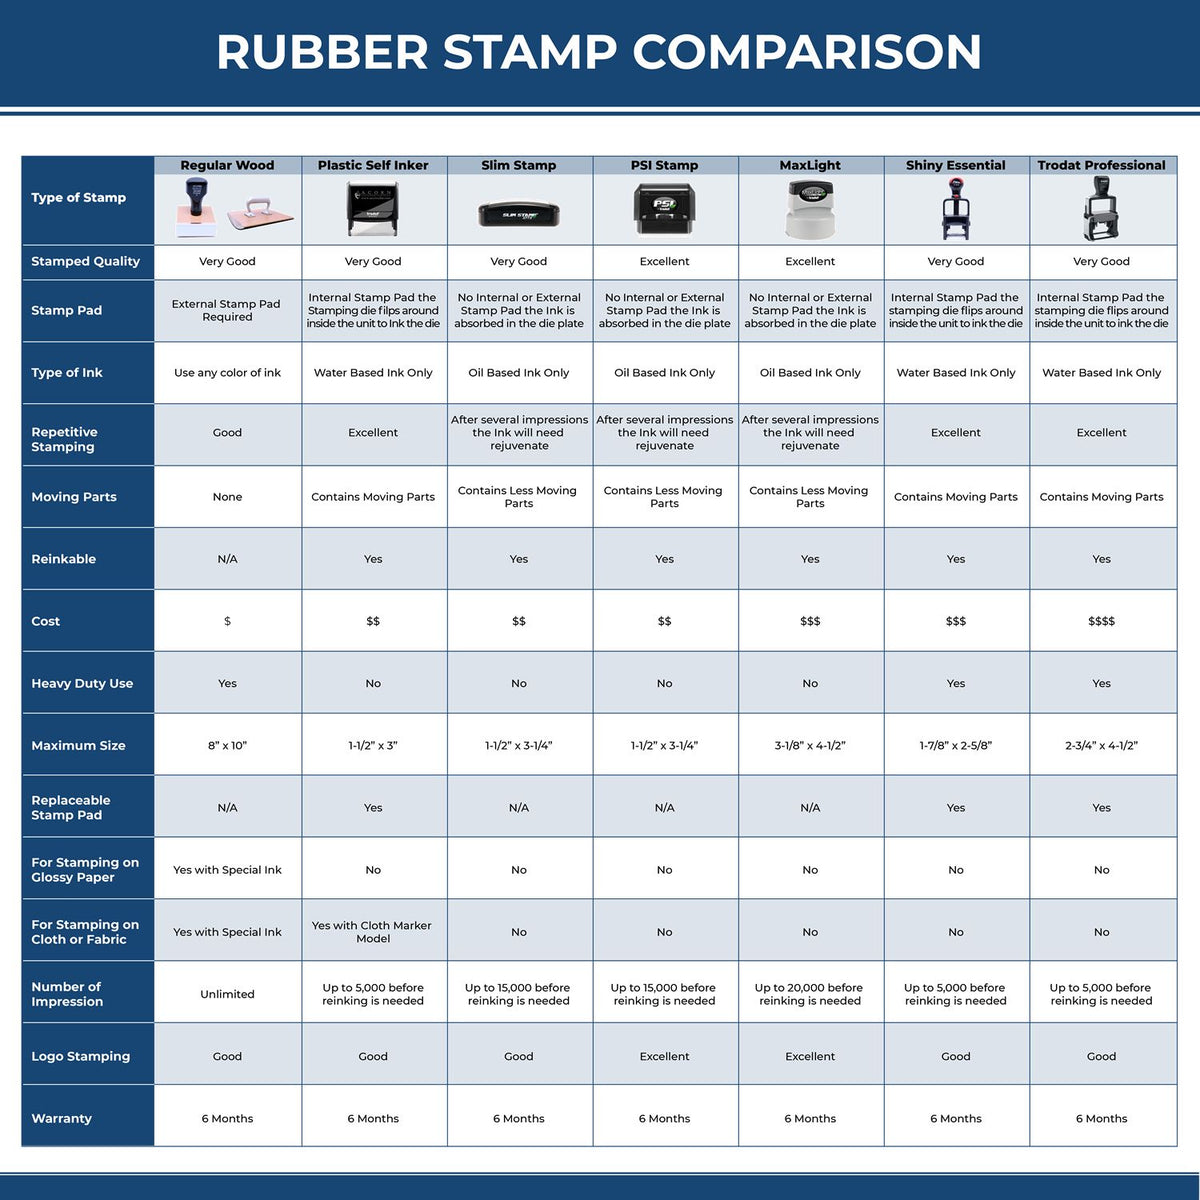 A comparison chart for the different types of mount models available for the Tennessee Professional Engineer Seal Stamp.